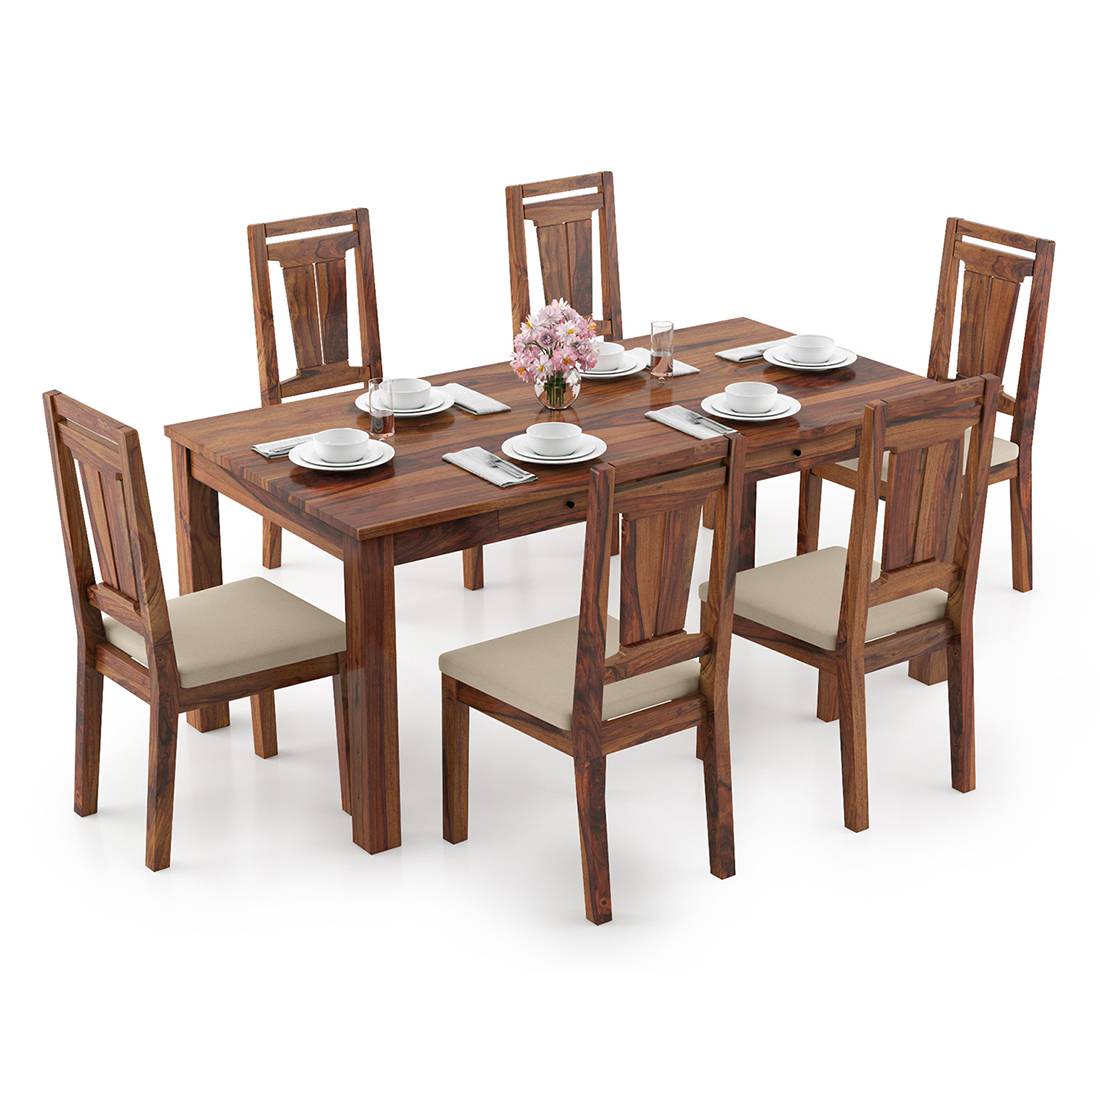 6 Seater Dining Table Six, 6 Seater Round Tables